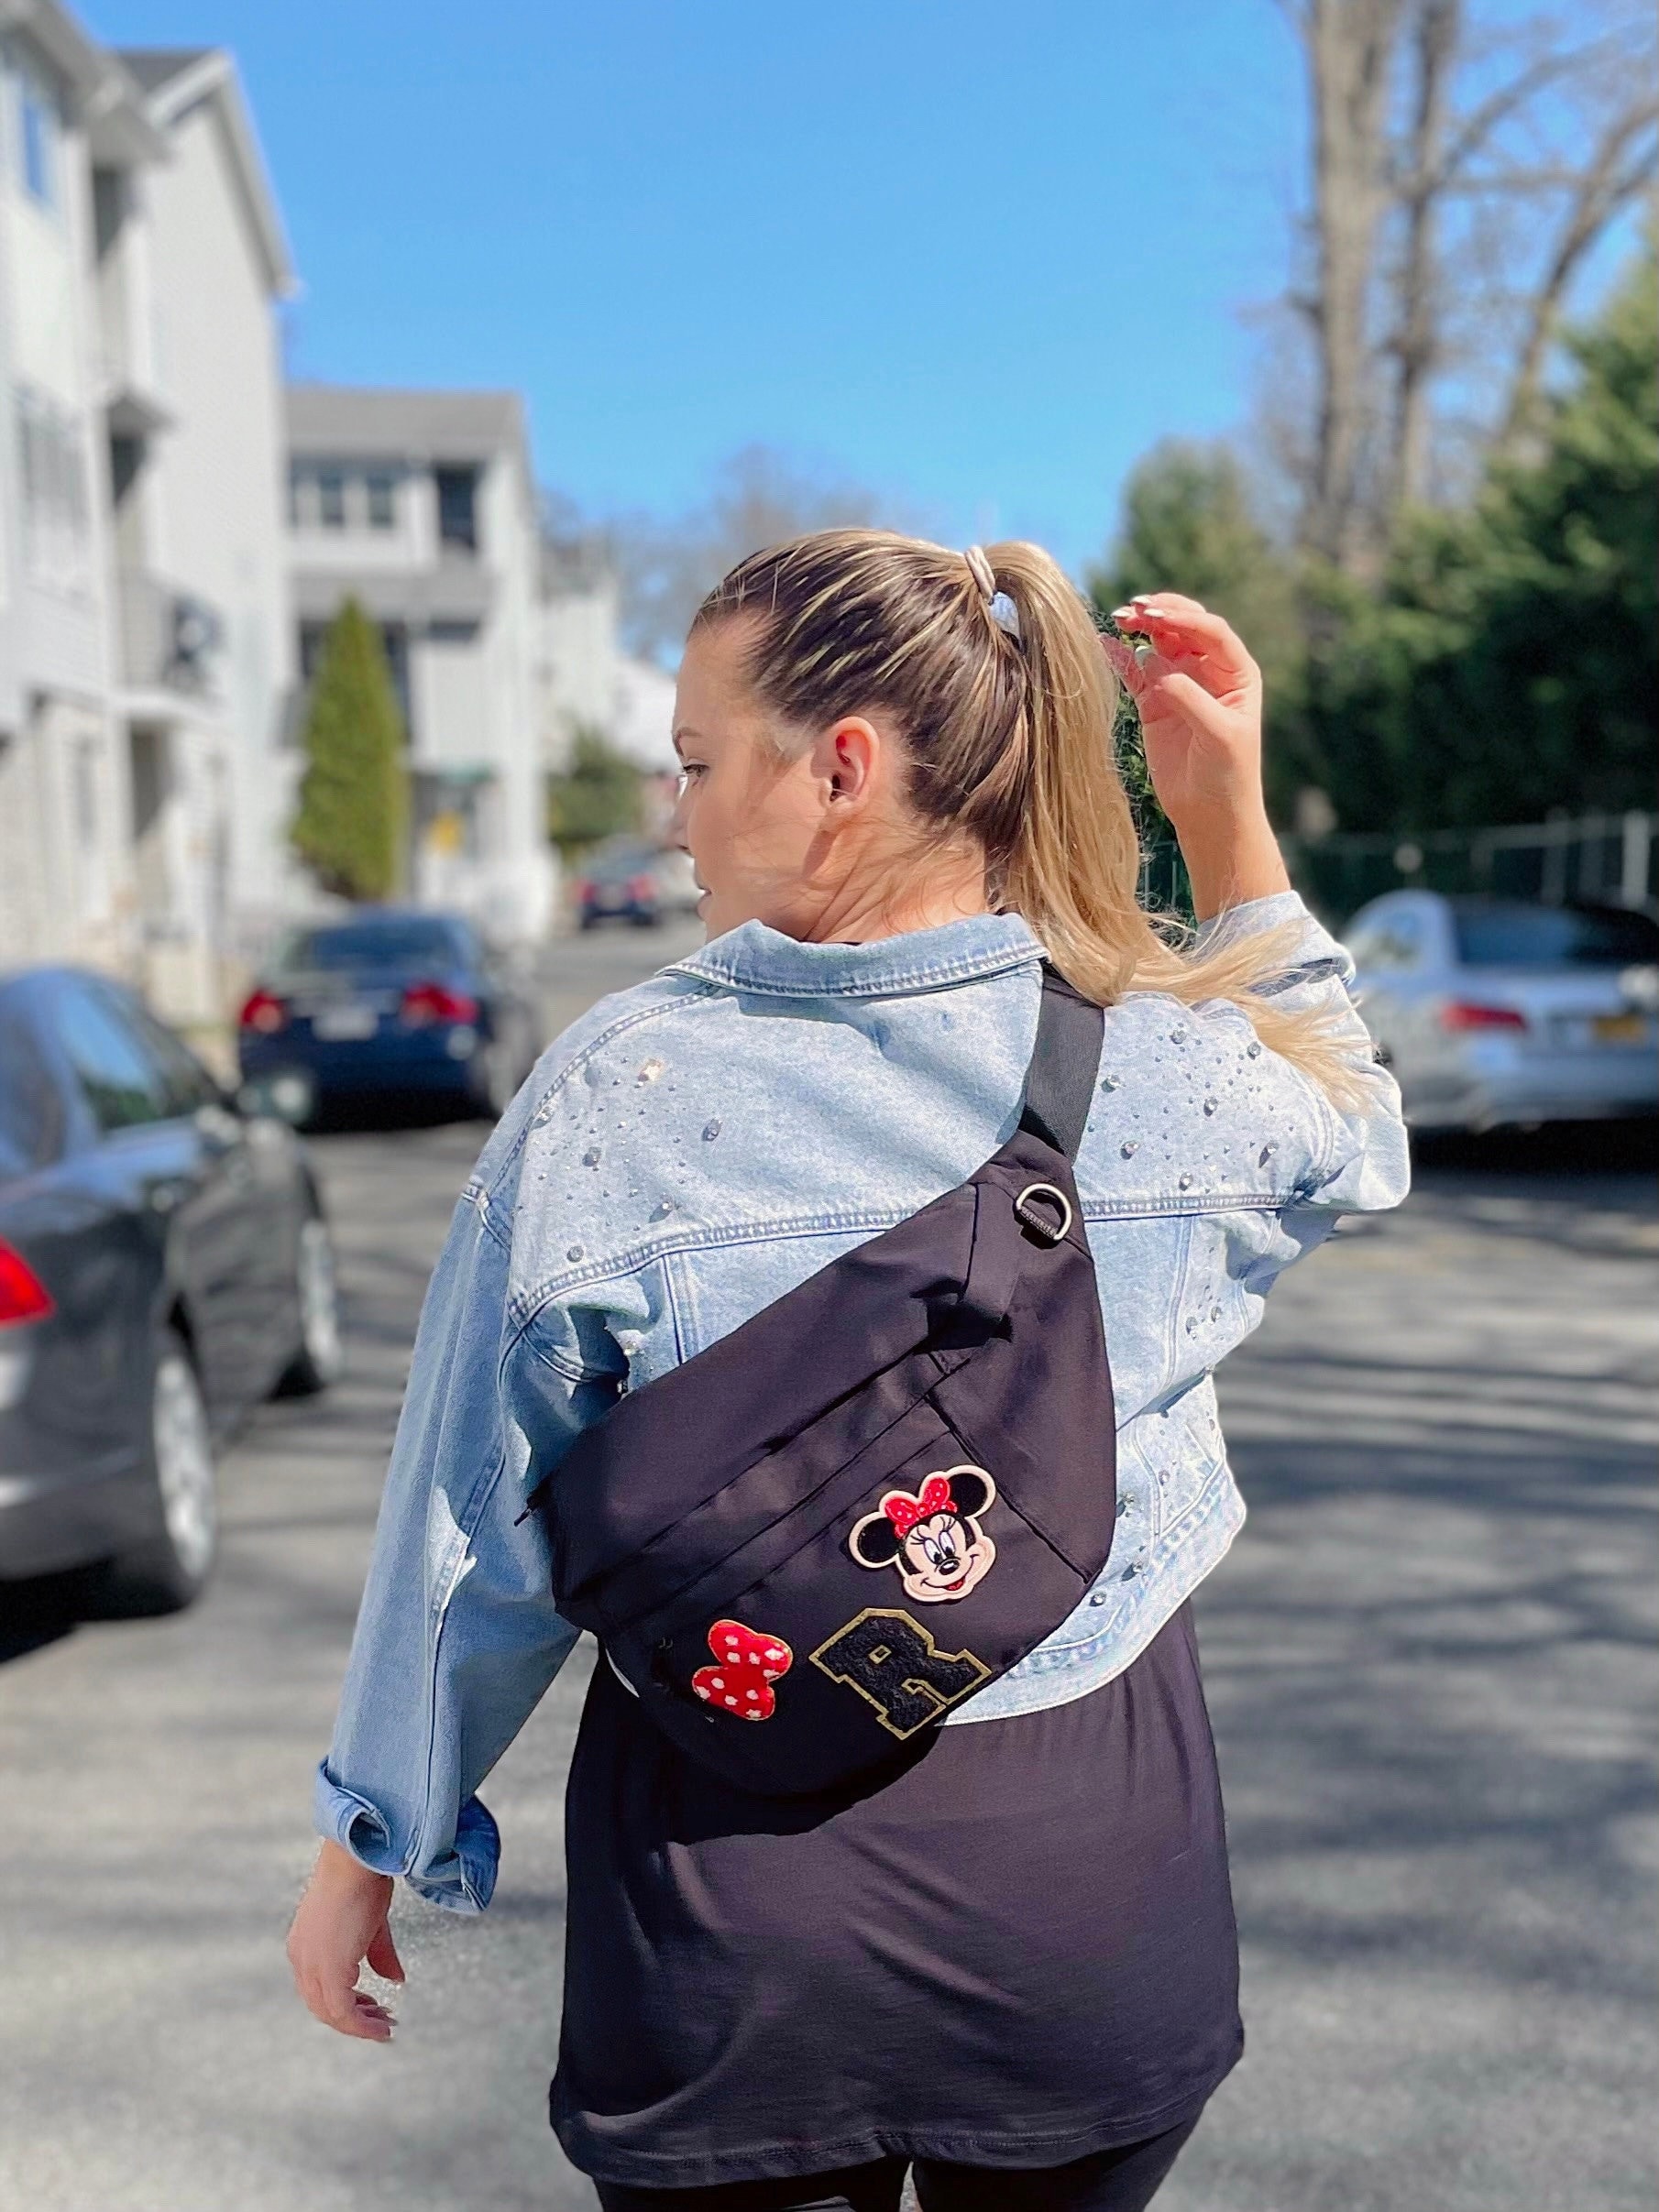 8 fashionable fanny packs with extended sizing for curvy fashionistas